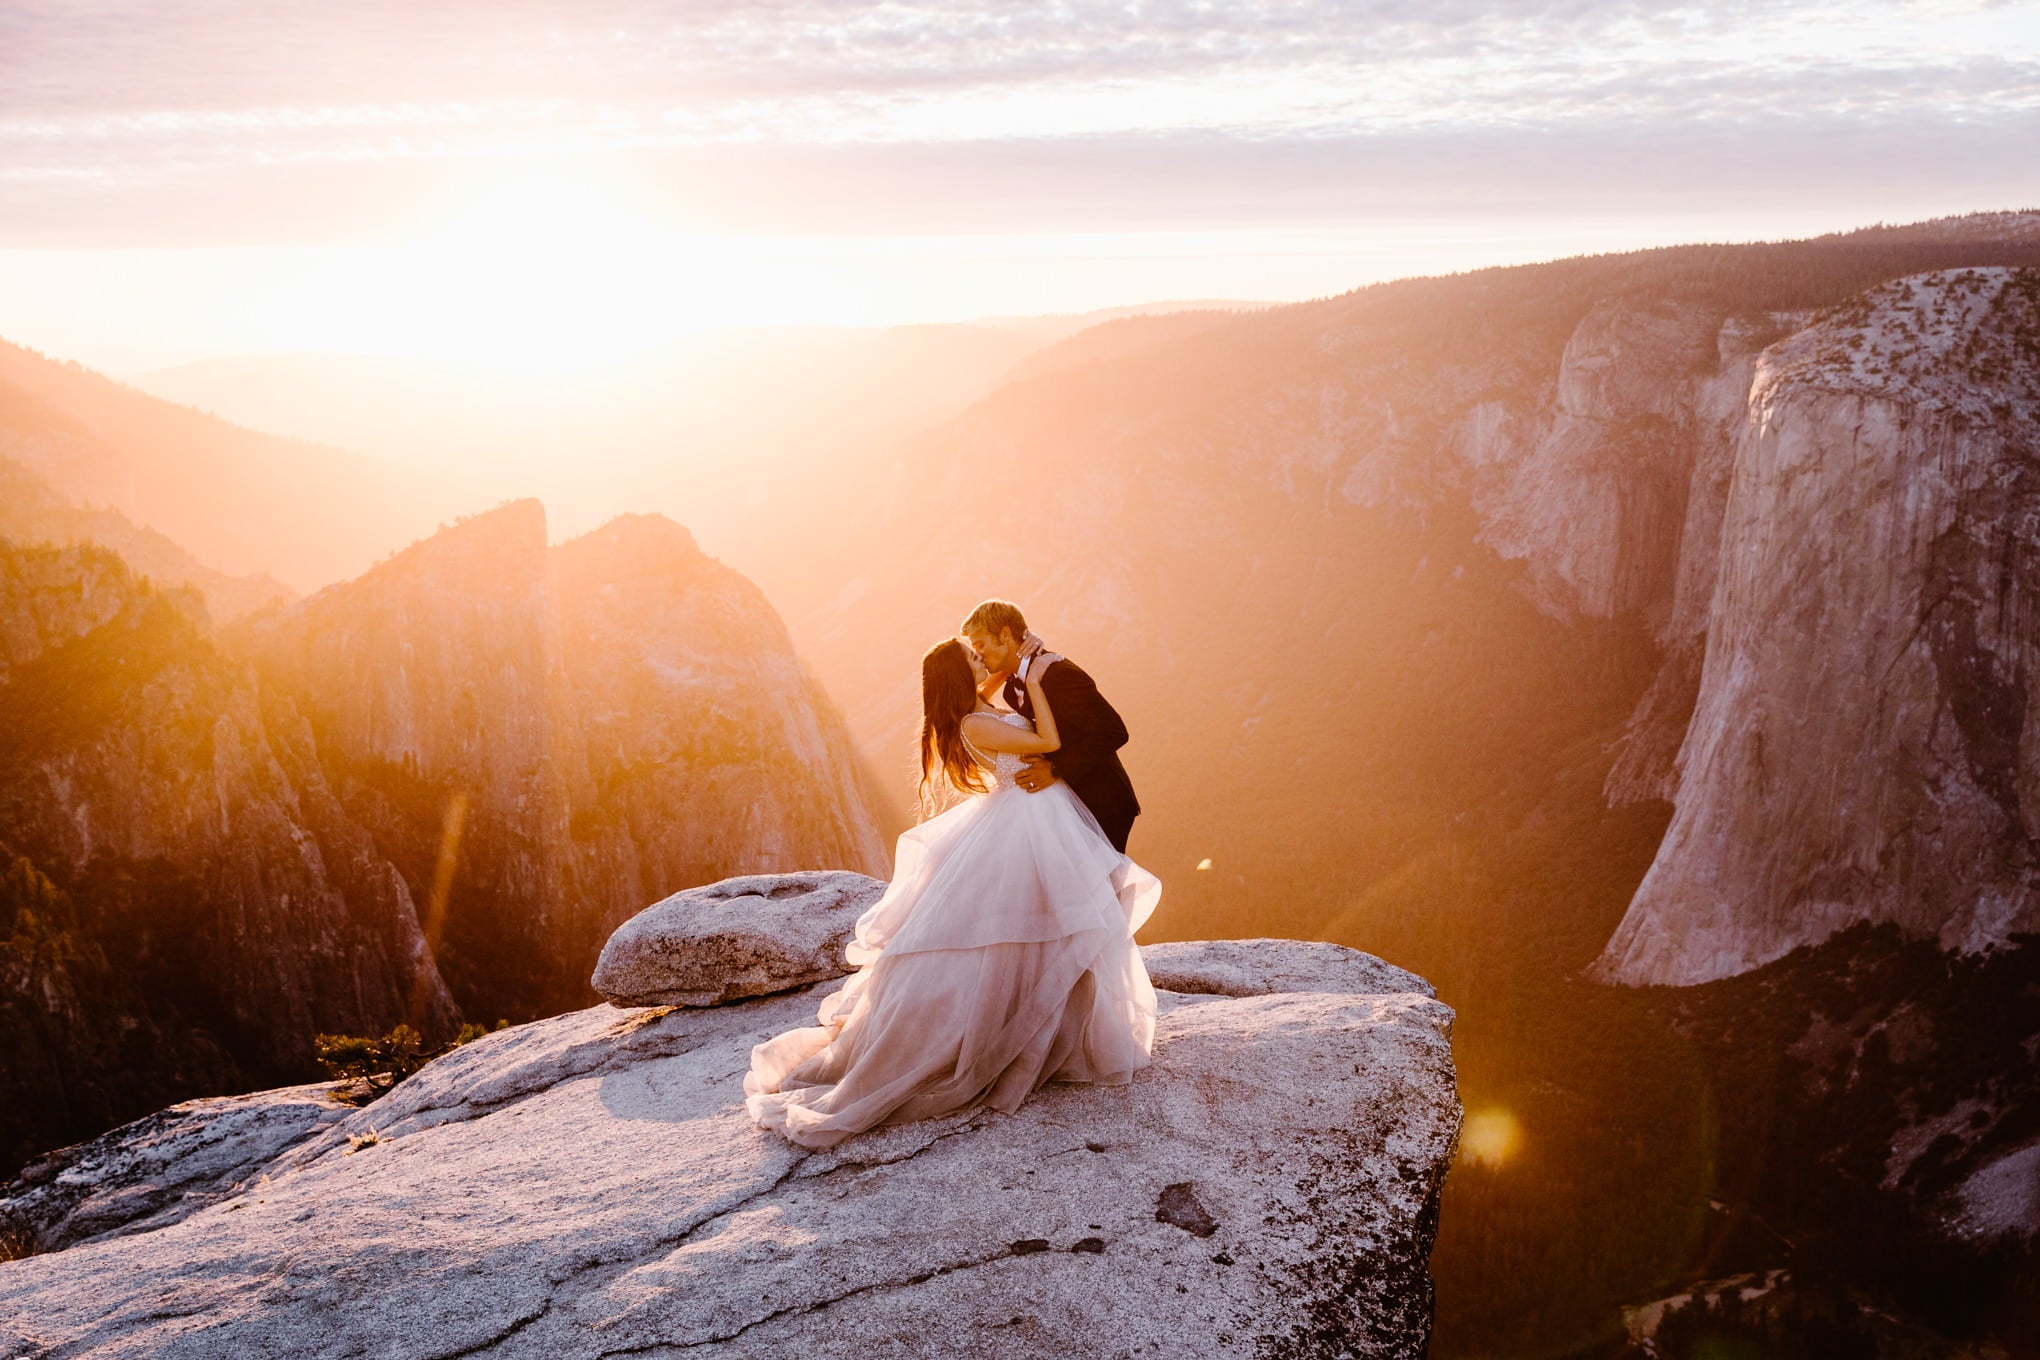 an adventure wedding photo of a bride and groom married on